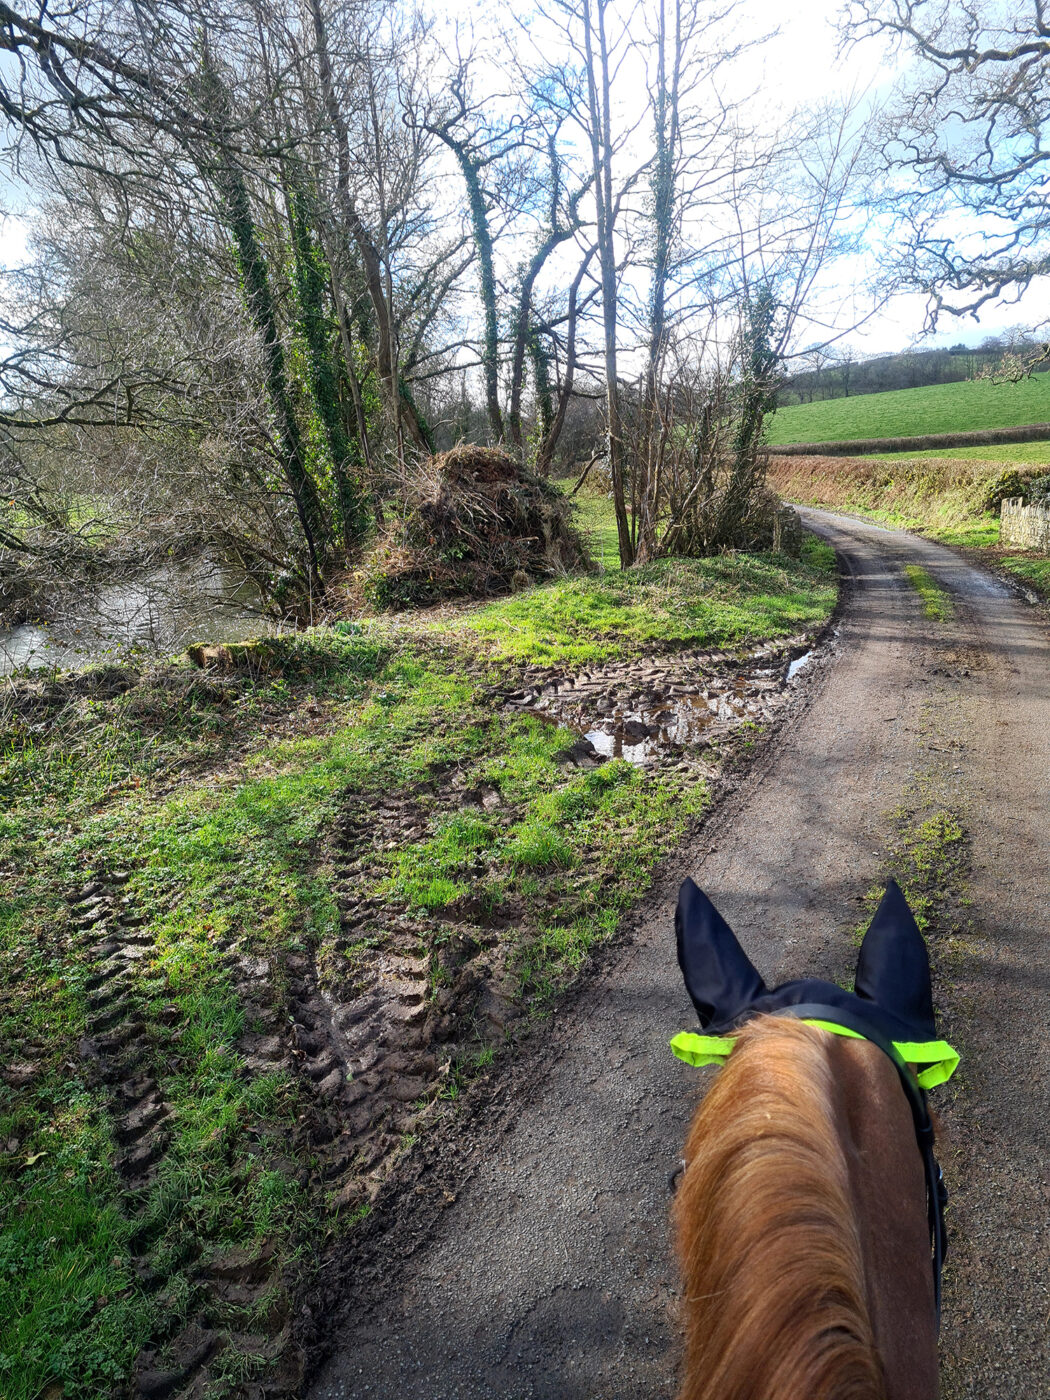 Hacking in country lanes